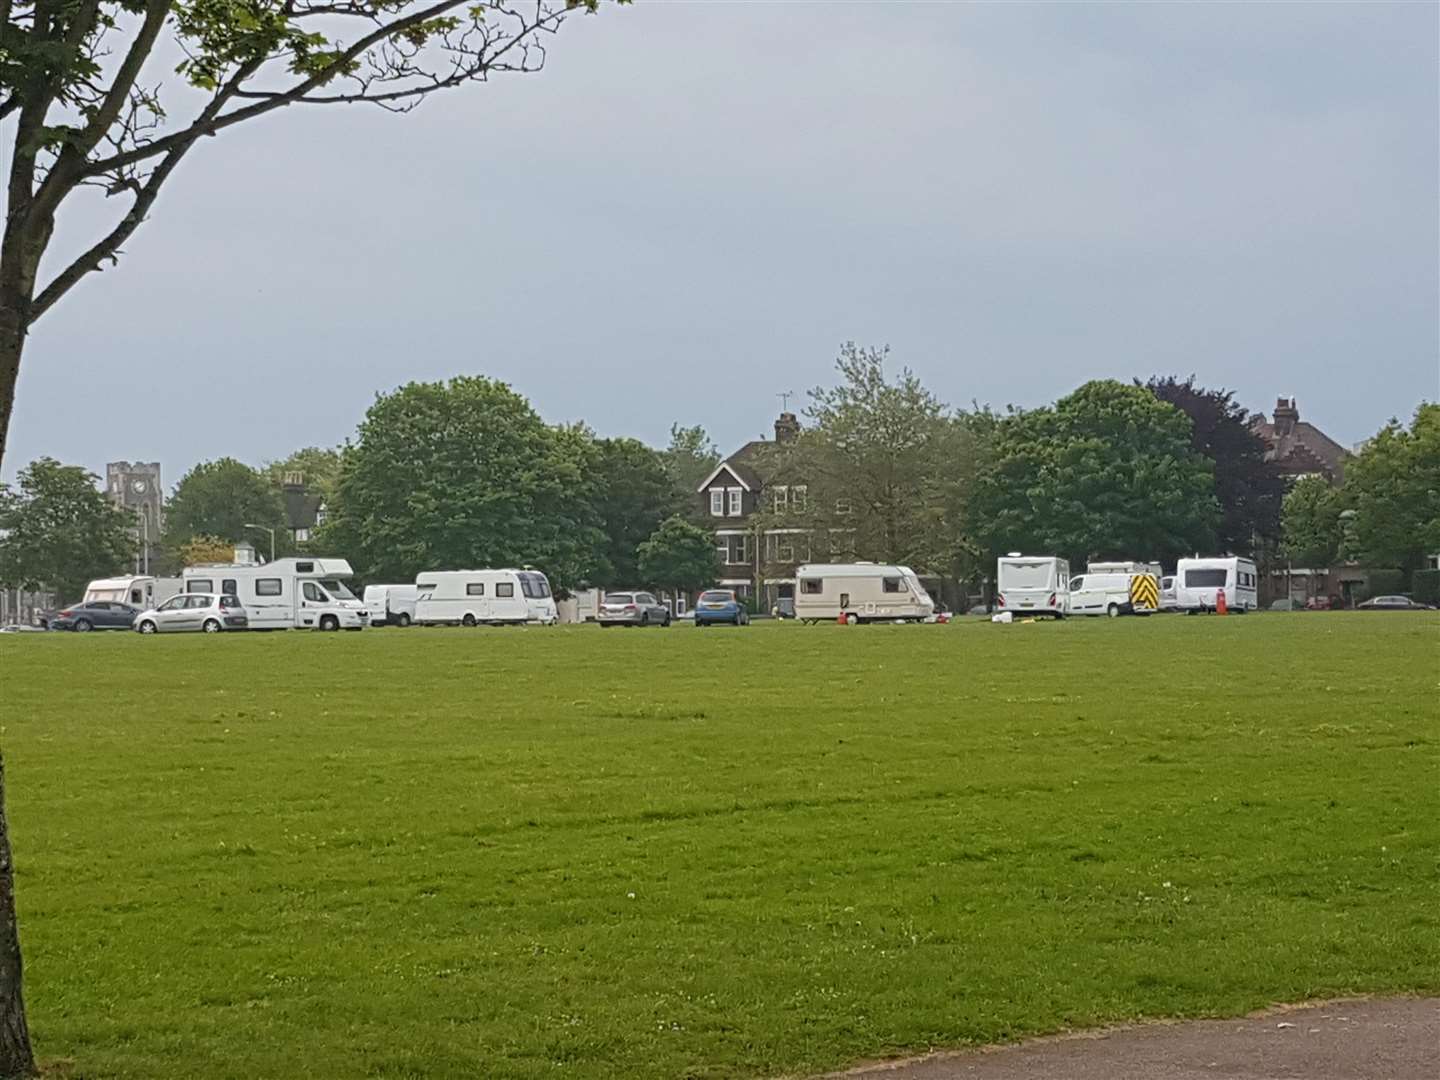 Travellers in Radnor Park